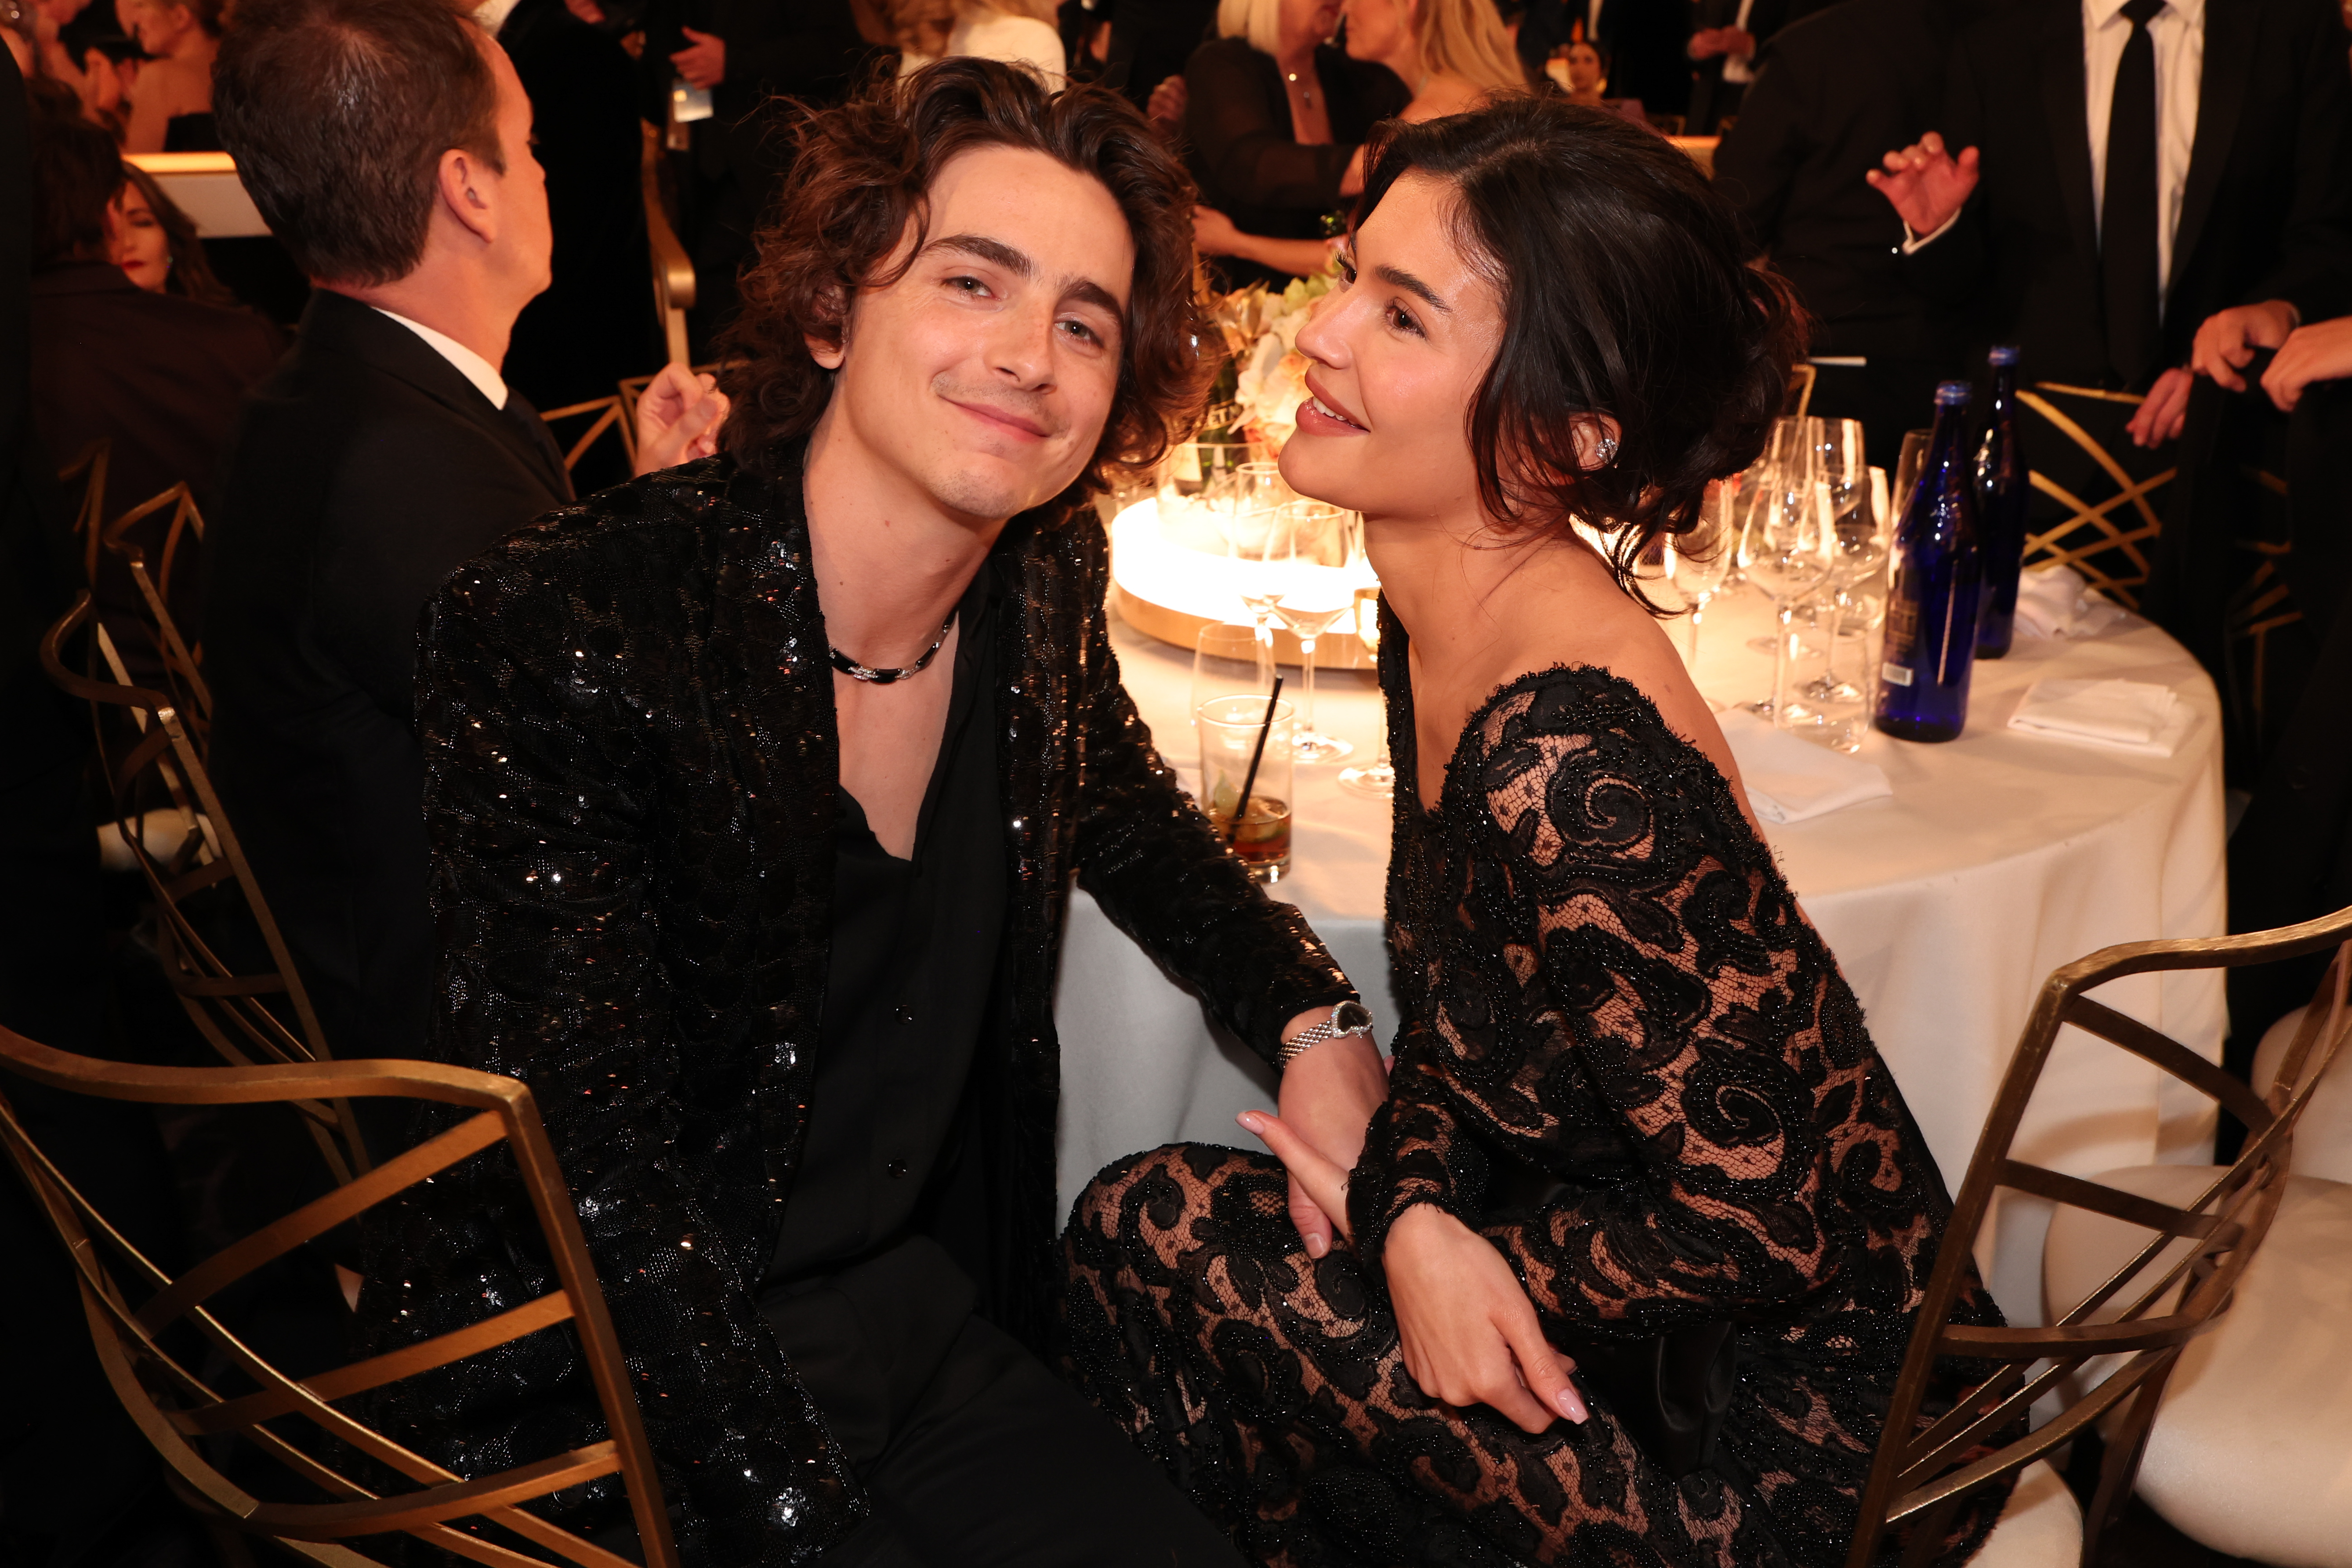 Rumors have been circulating that Kylie is pregnant with her boyfriend, Timothee Chalamet's baby